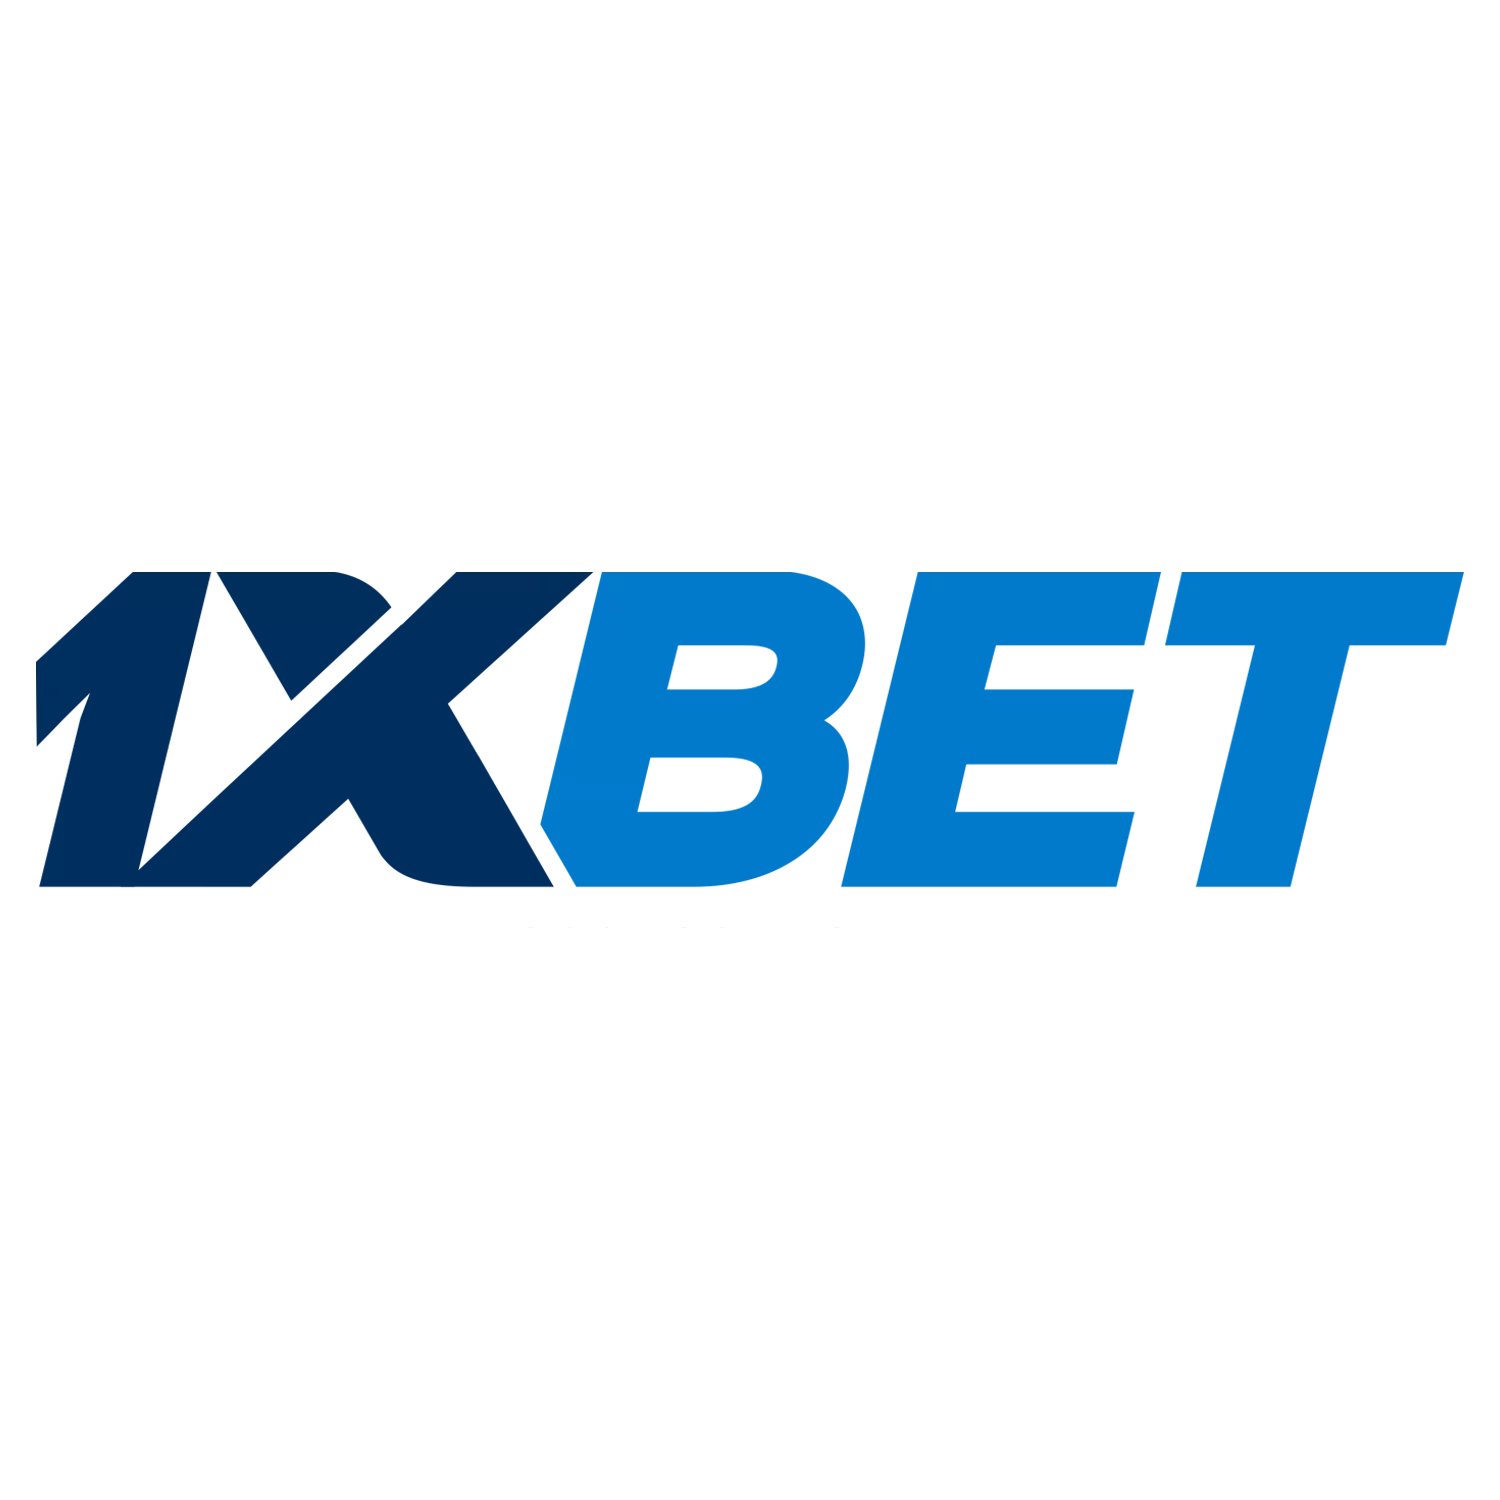 1xbet online casino for real money.